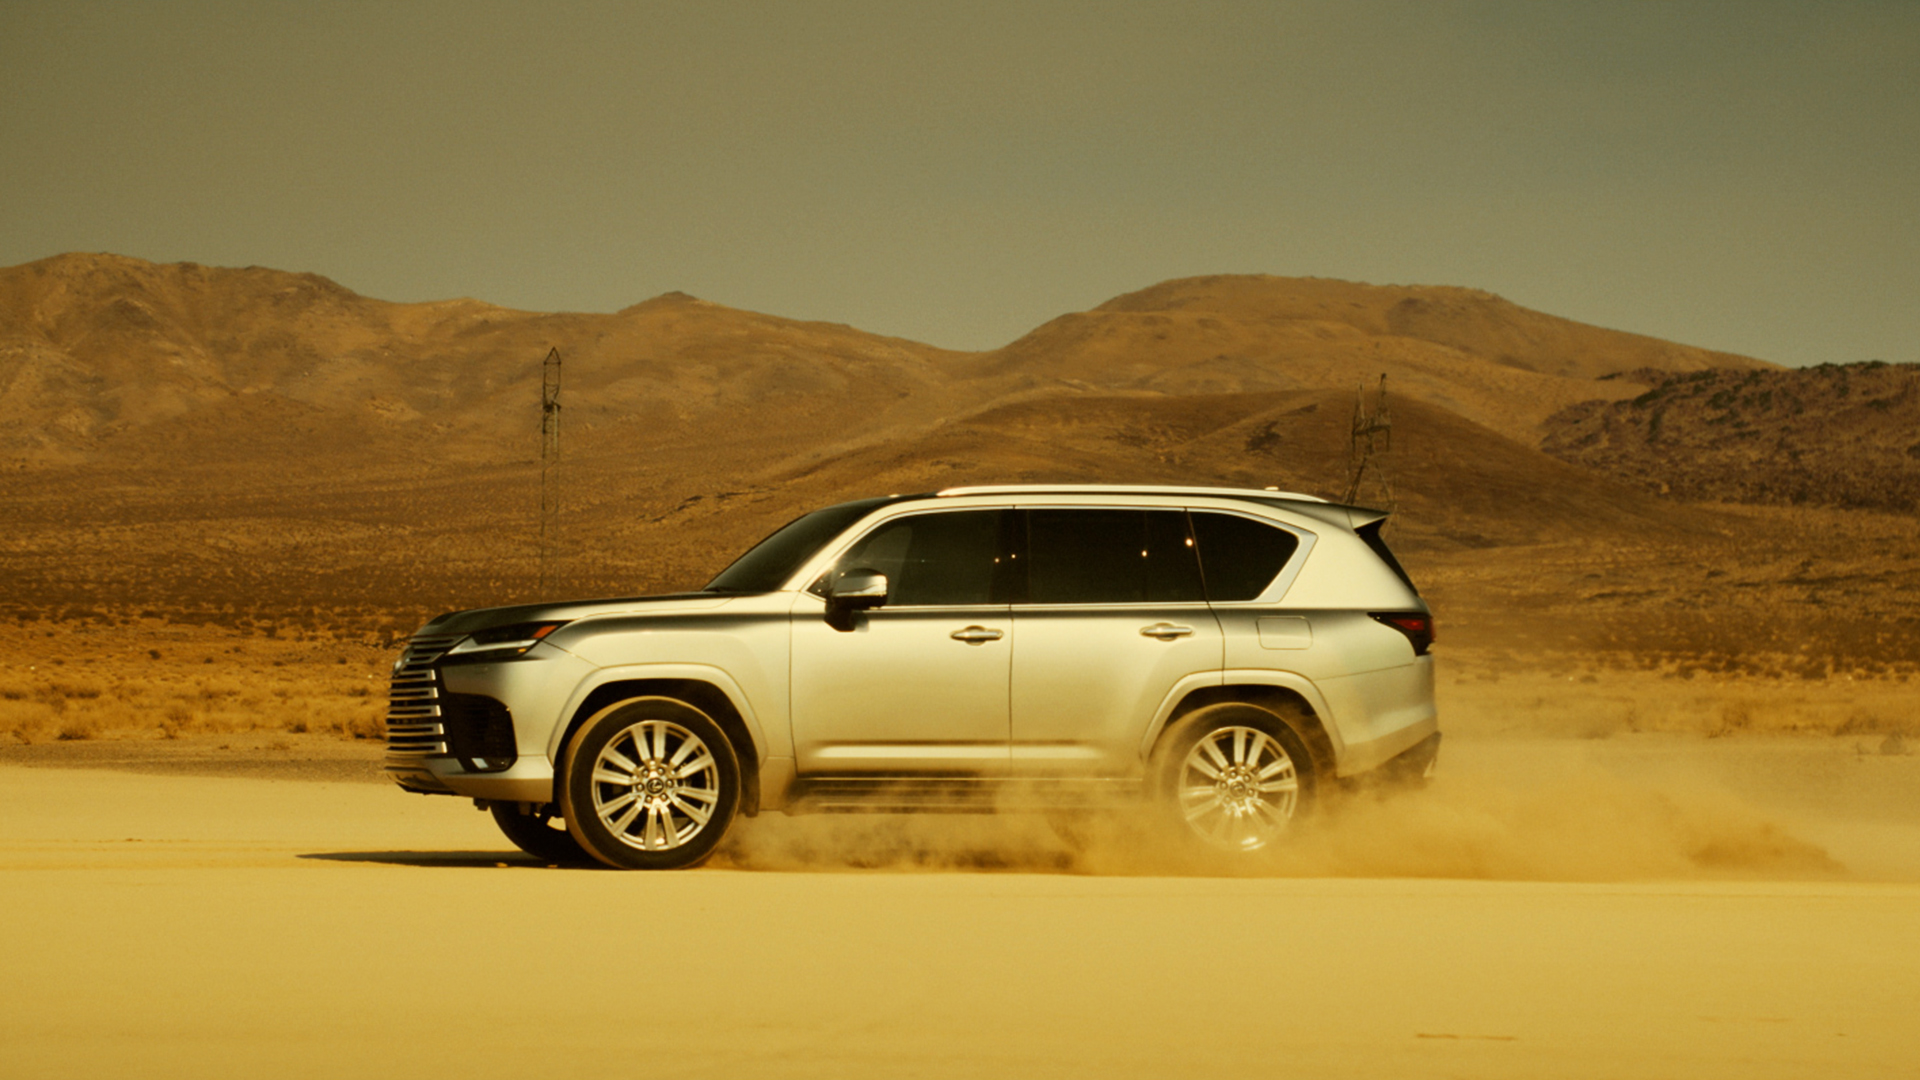 The Flagship Lexus LX SUV Now with Exclusive Benefits  